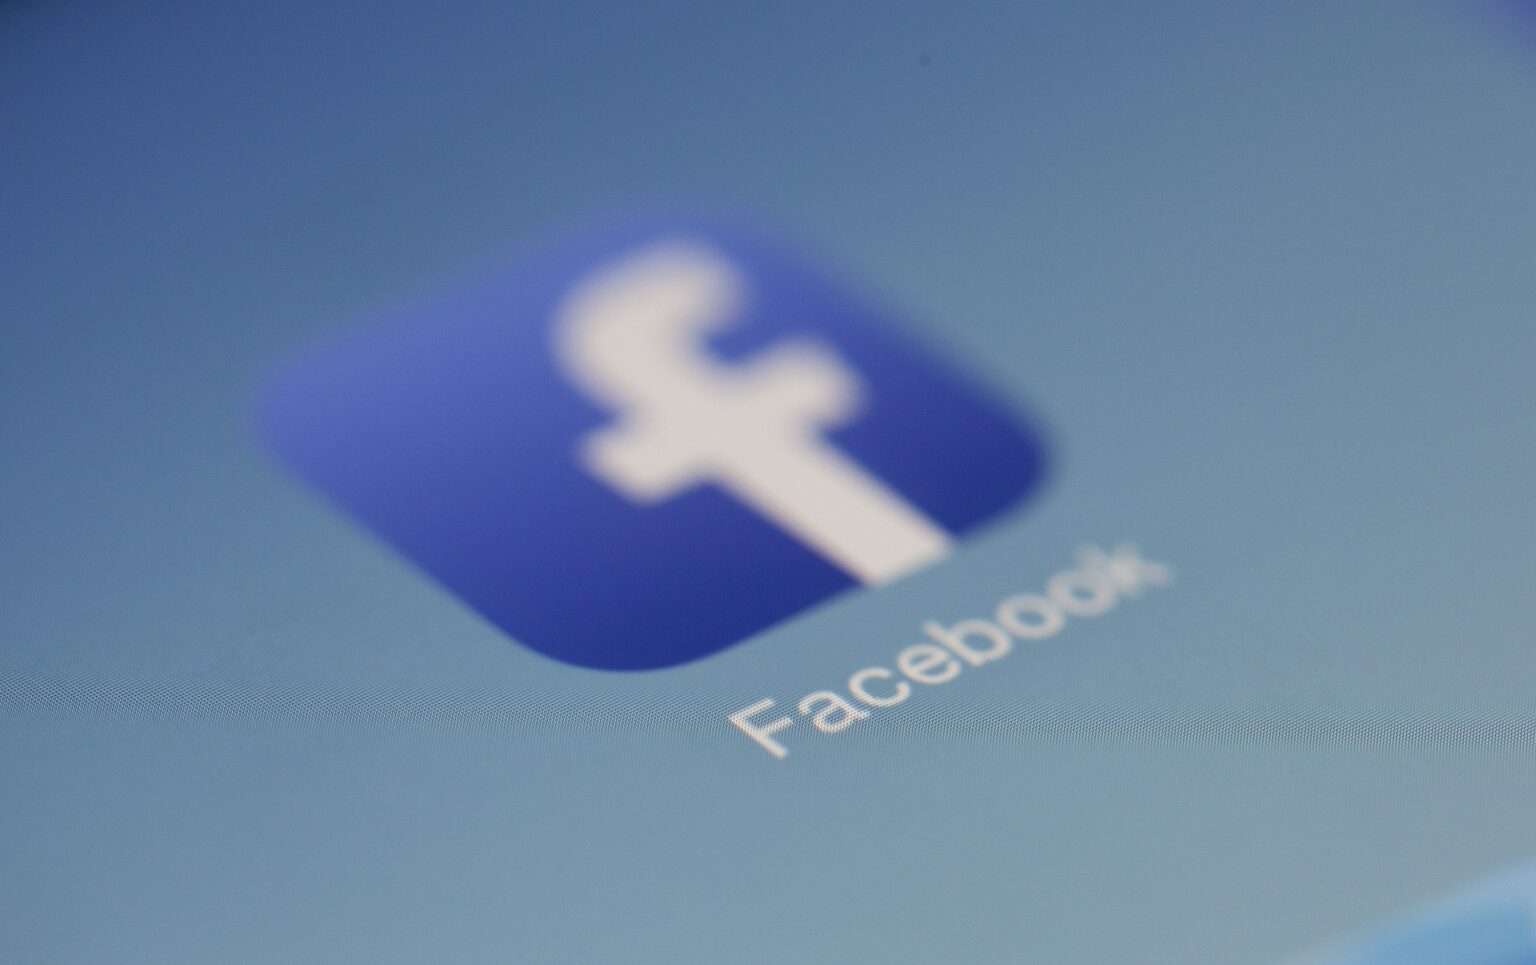 FACEBOOK PROJECTED TO PLATEAU, NOT GROW IN COMING YEARS